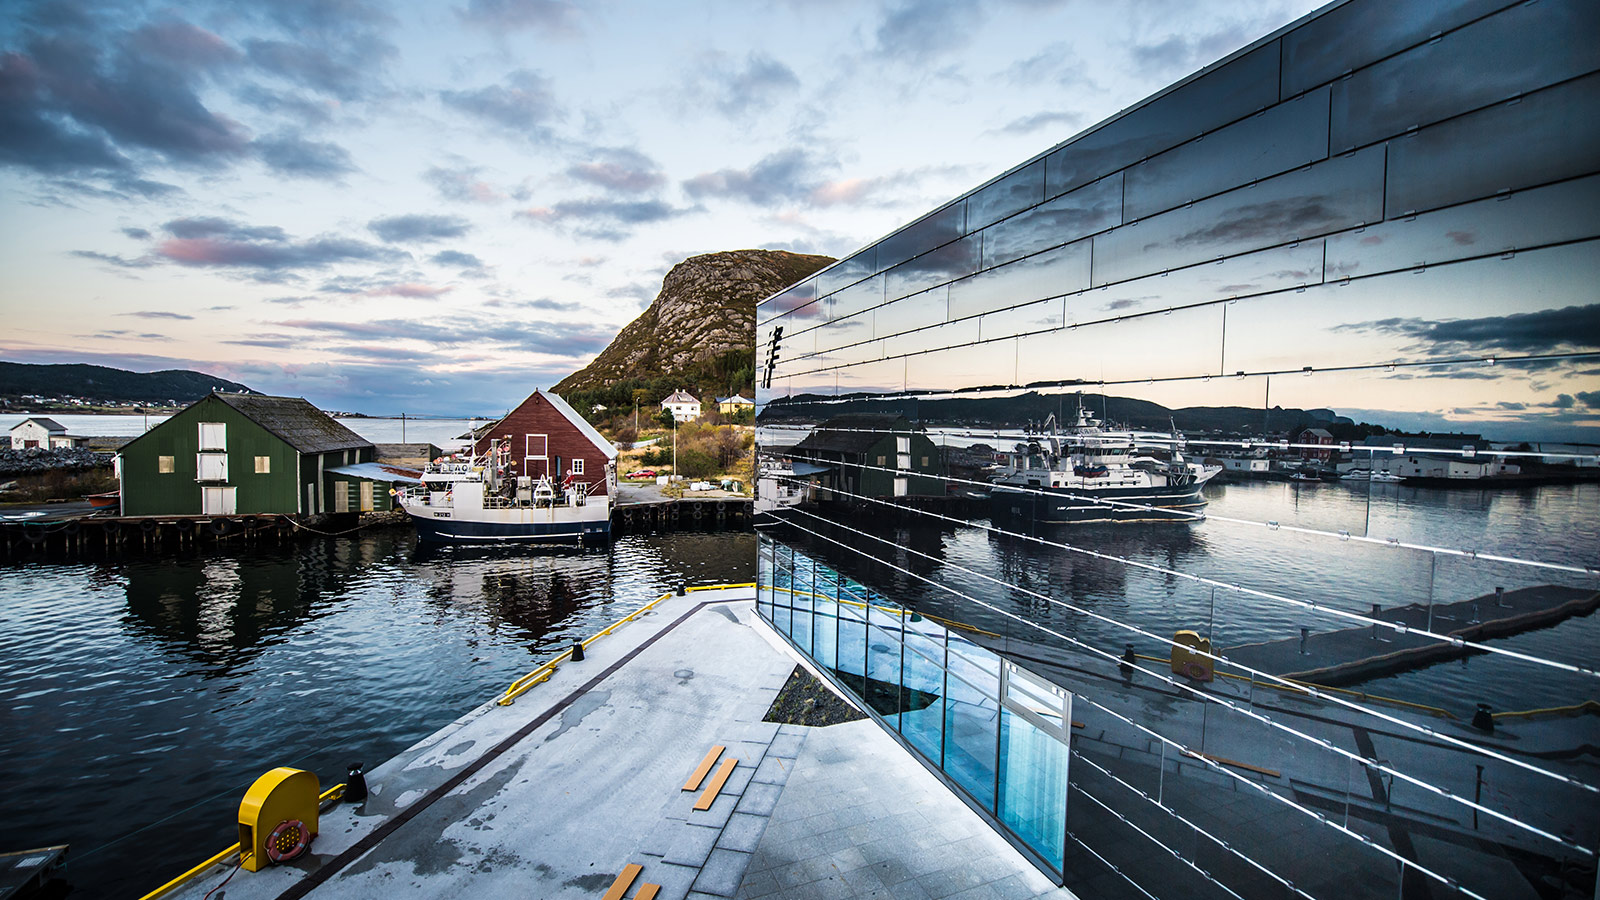 Norway's Fosnavåg Cultural Centre is a Shiny New Showcase for Meyer Sound Technology Solutions